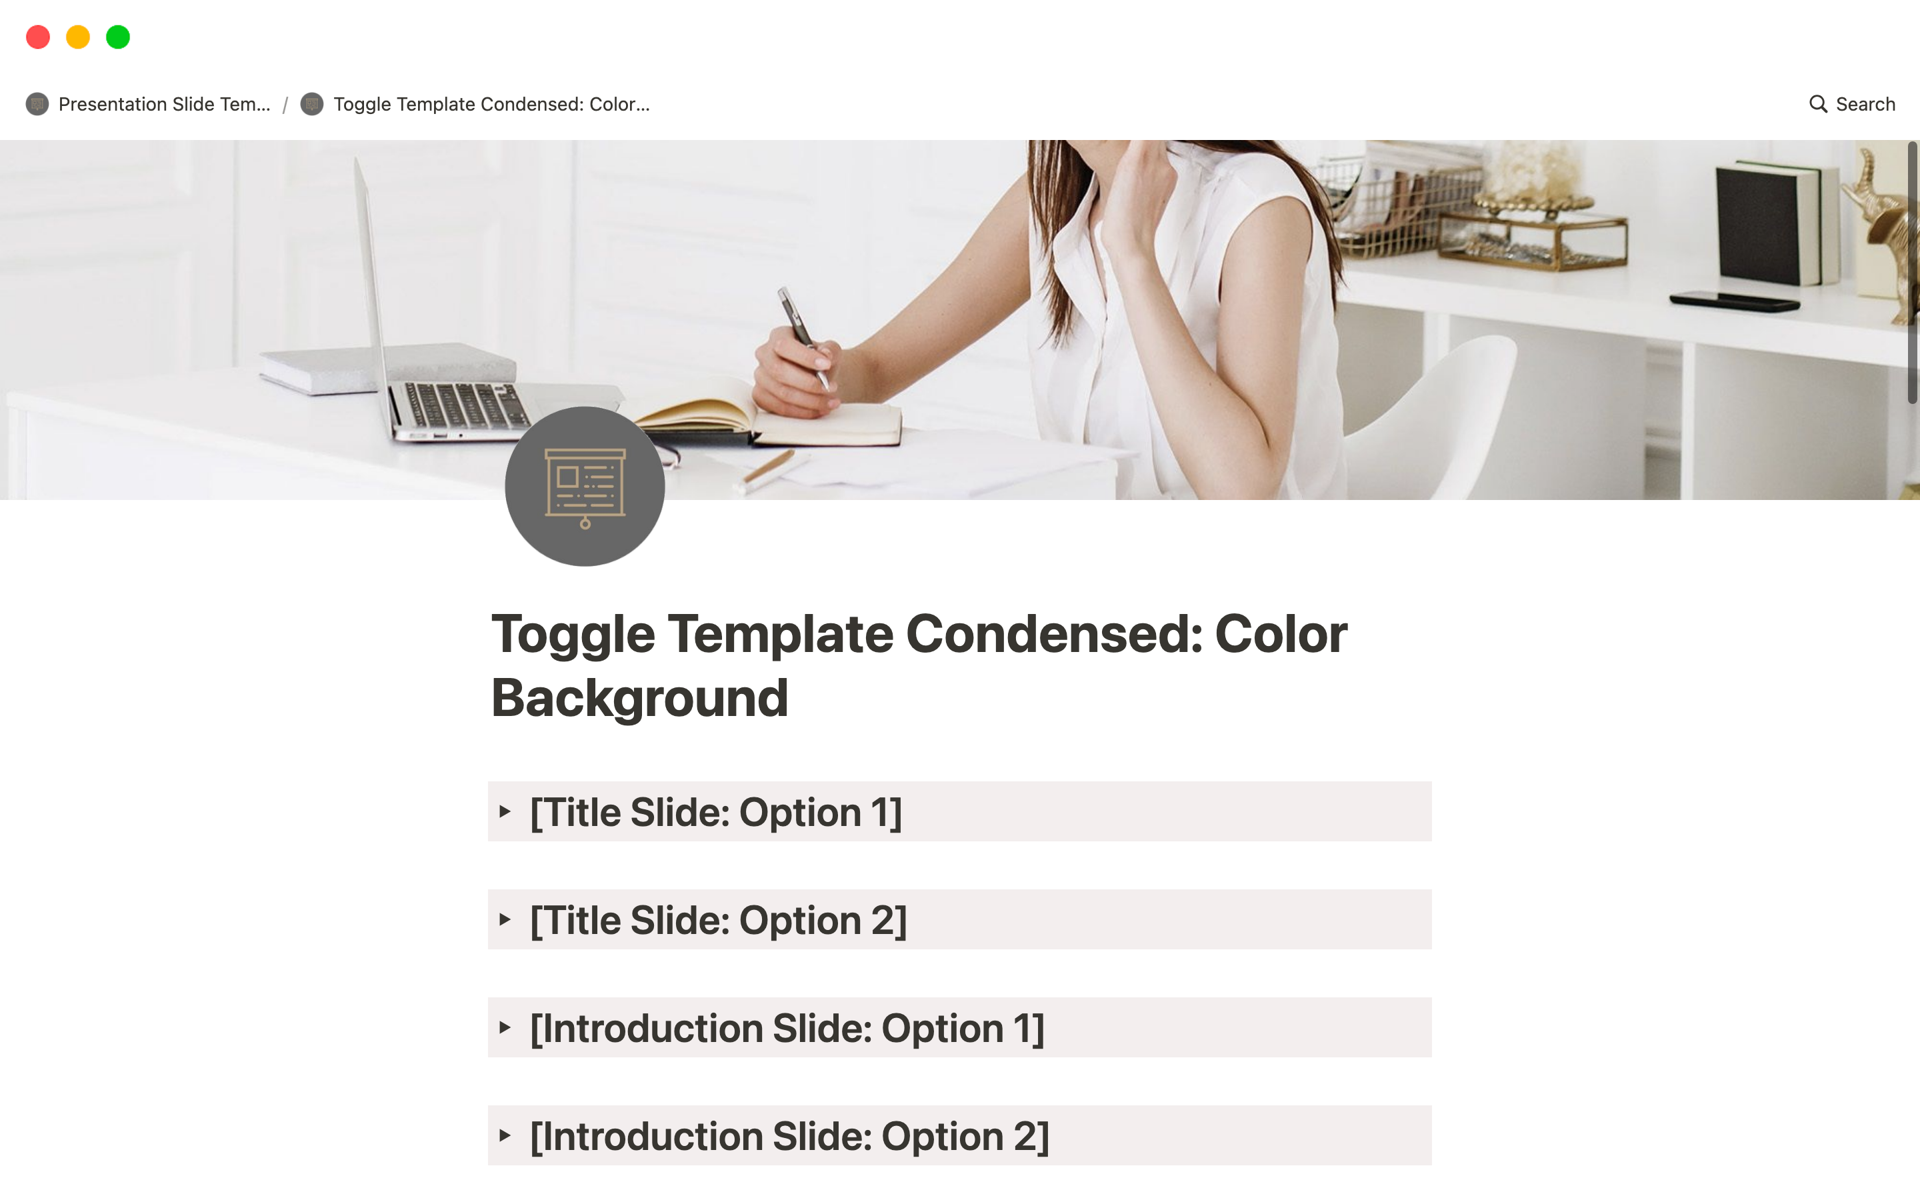 Provides business owners with slide templates for their presentations.